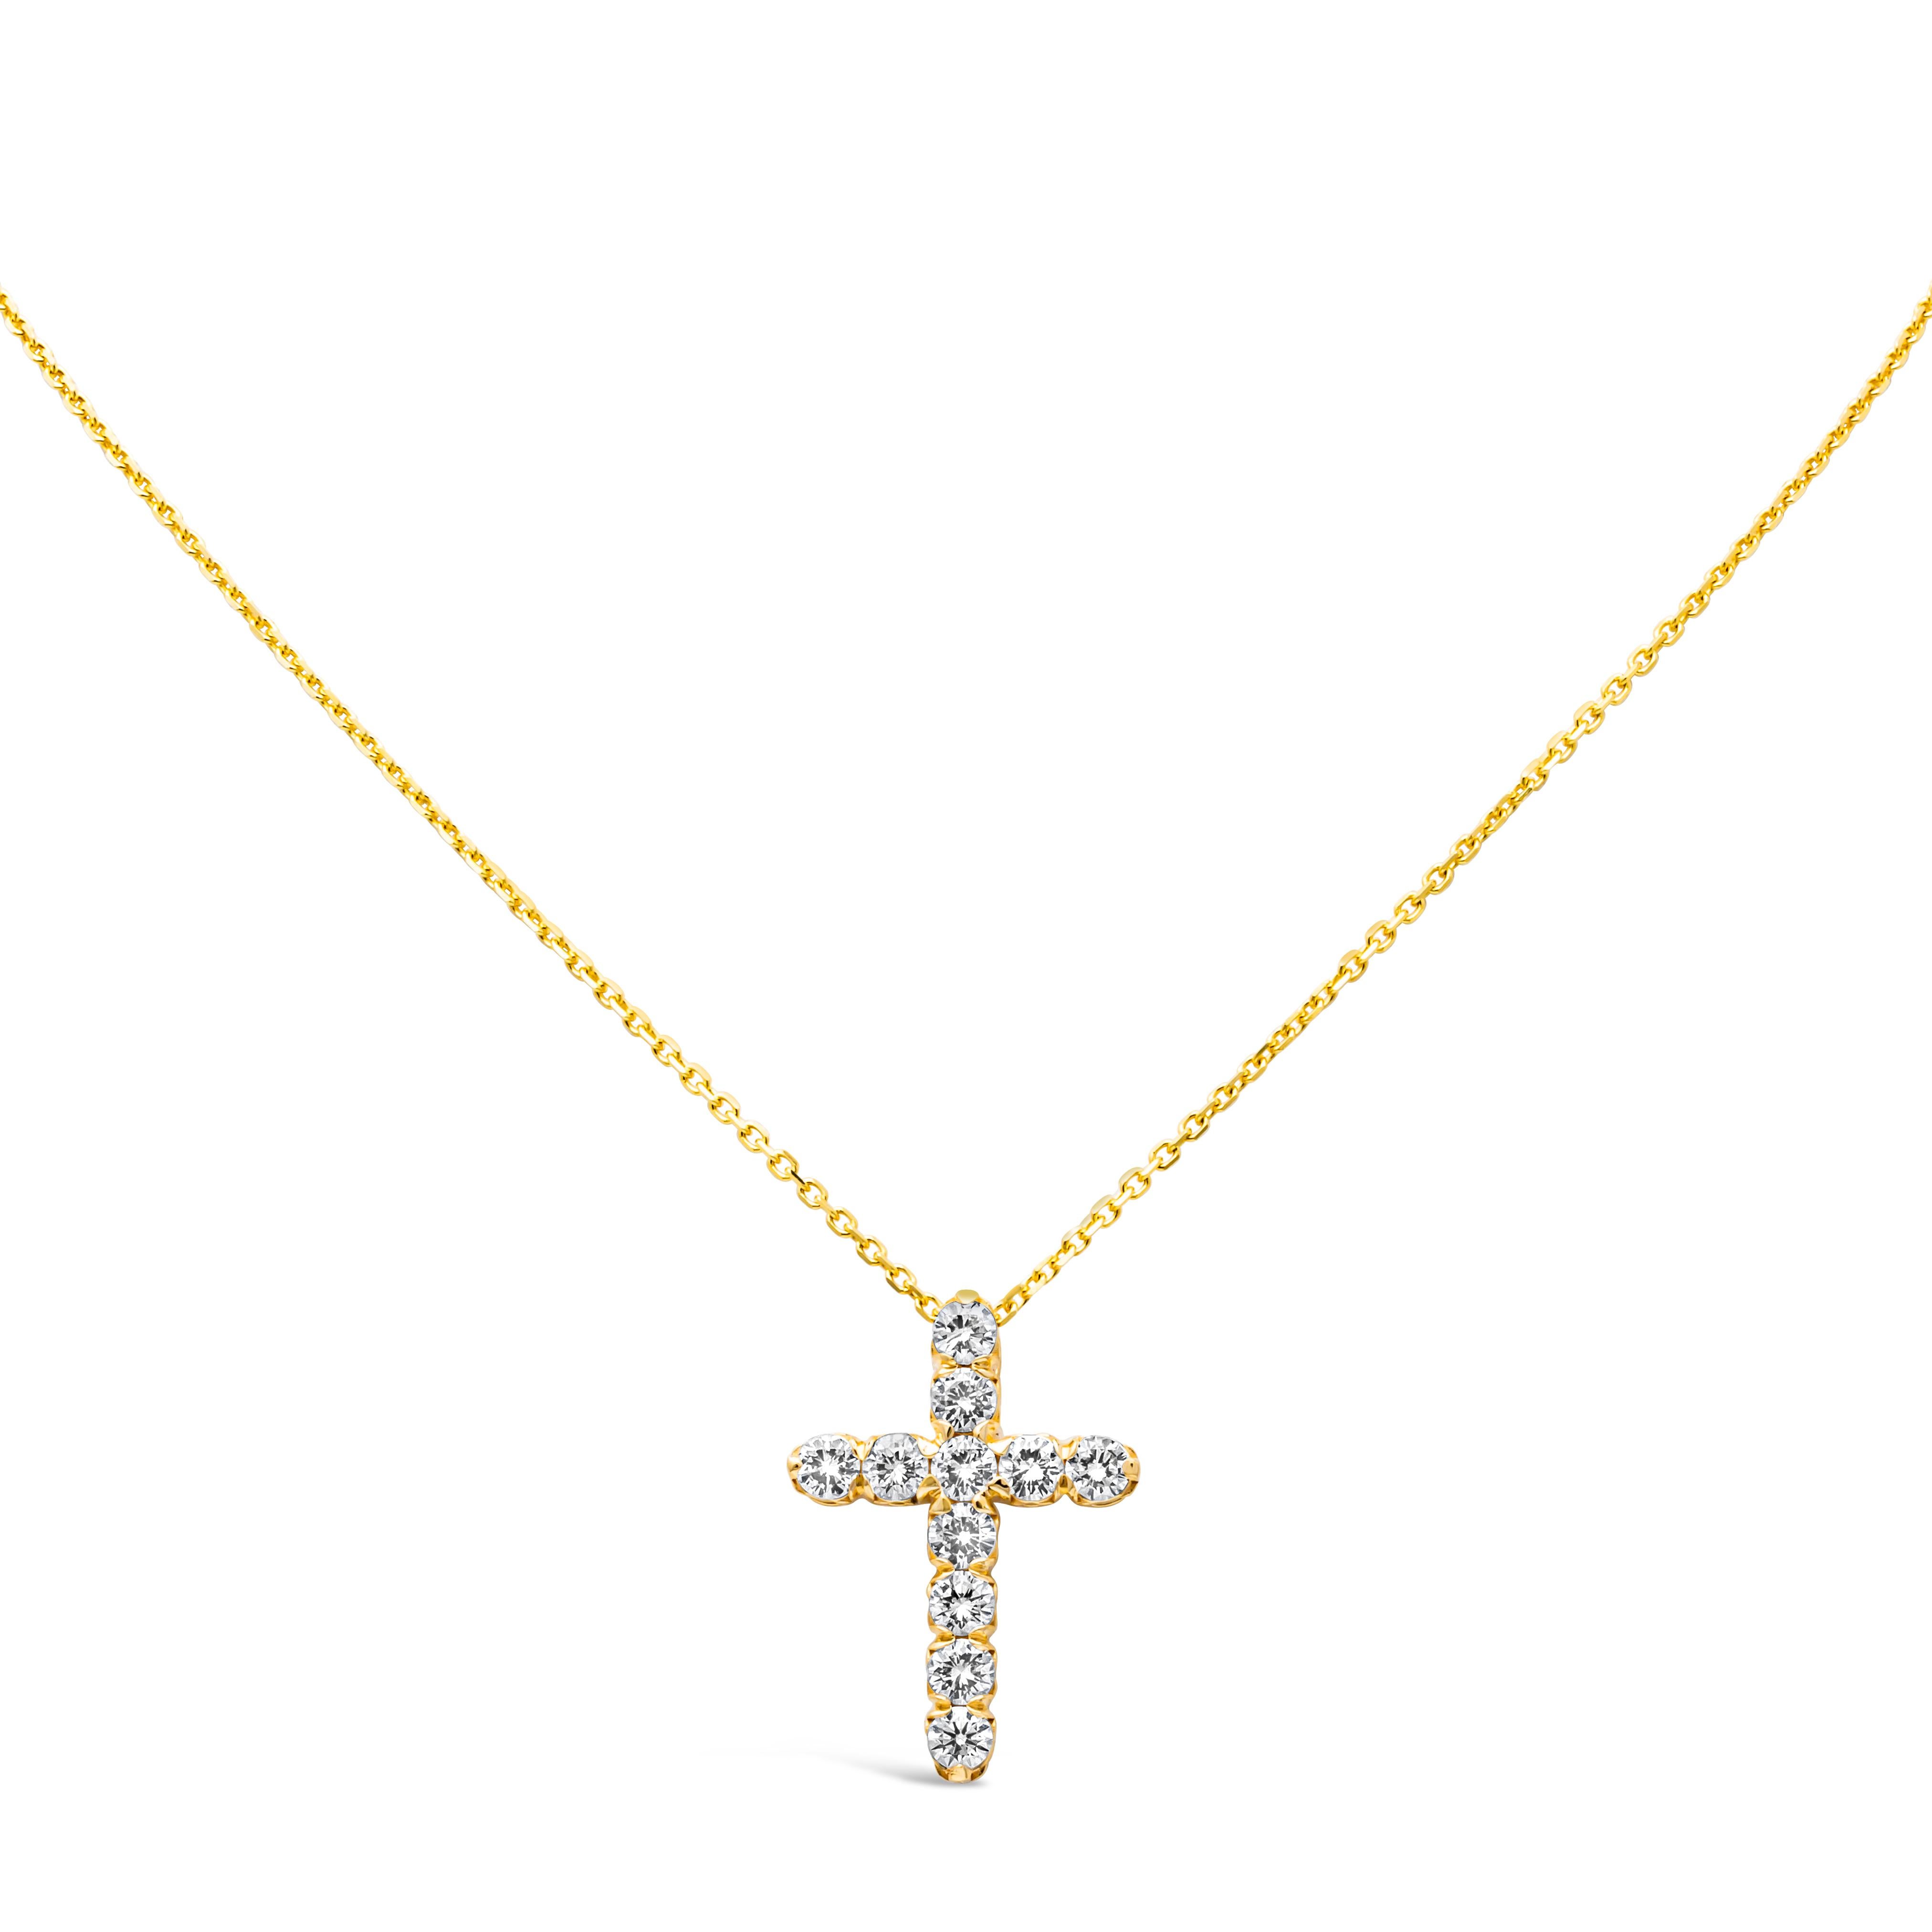 A classy and stunning pendant necklace showcasing 11 brilliant round cut diamond weighing 1.50 carats total, G color and VS in clarity, set in a religious cross design shared prong setting. Finely made in 18K Yellow Gold, Suspended on an 18 inch